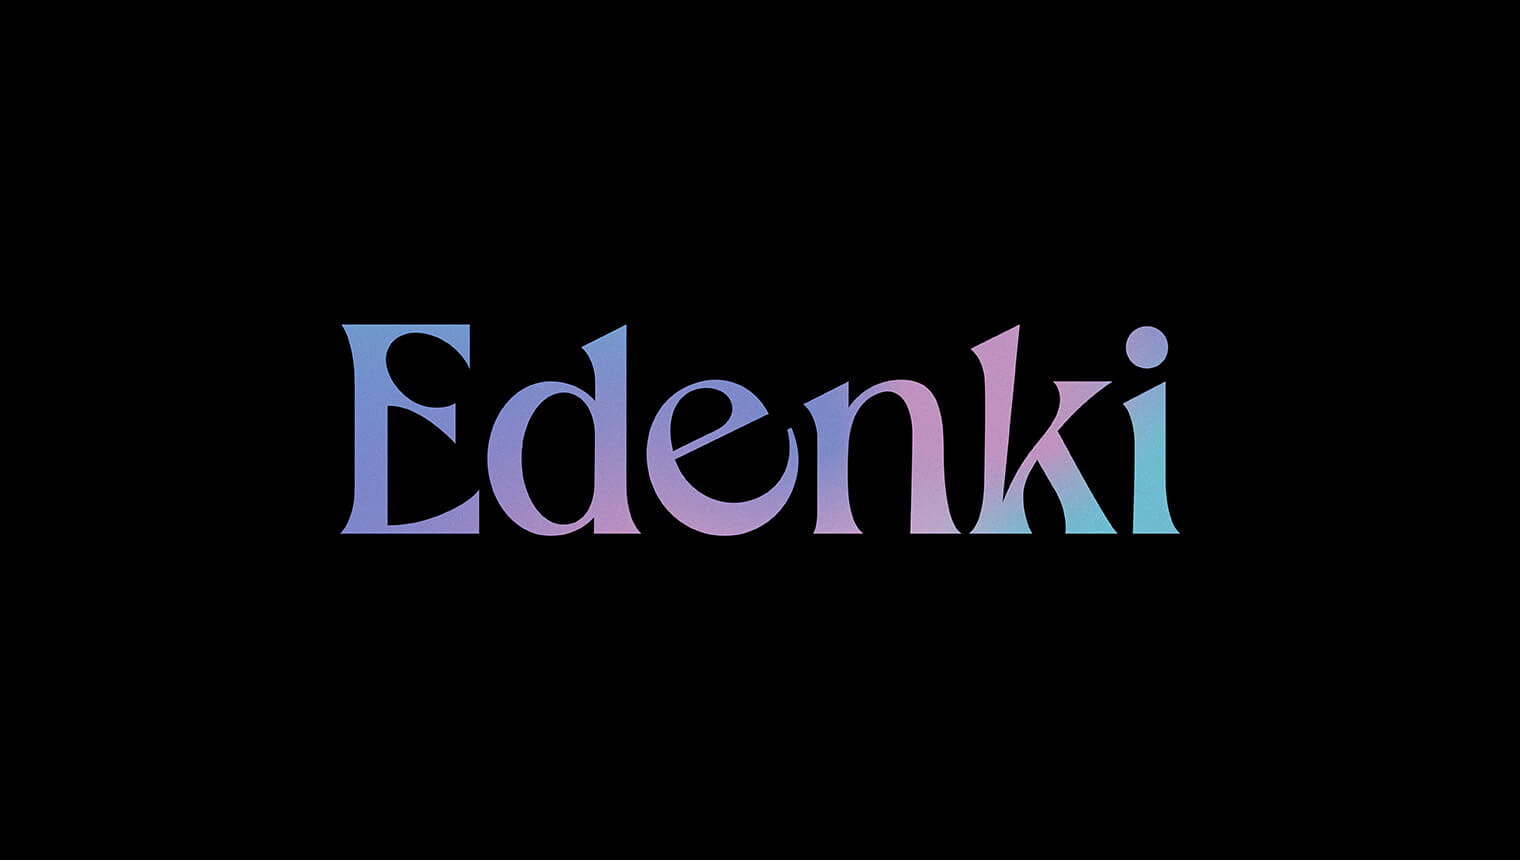 The thumbnail for the Edenki rebranding case study showing a gradient-coloured version of the Edenki logo on a black background.